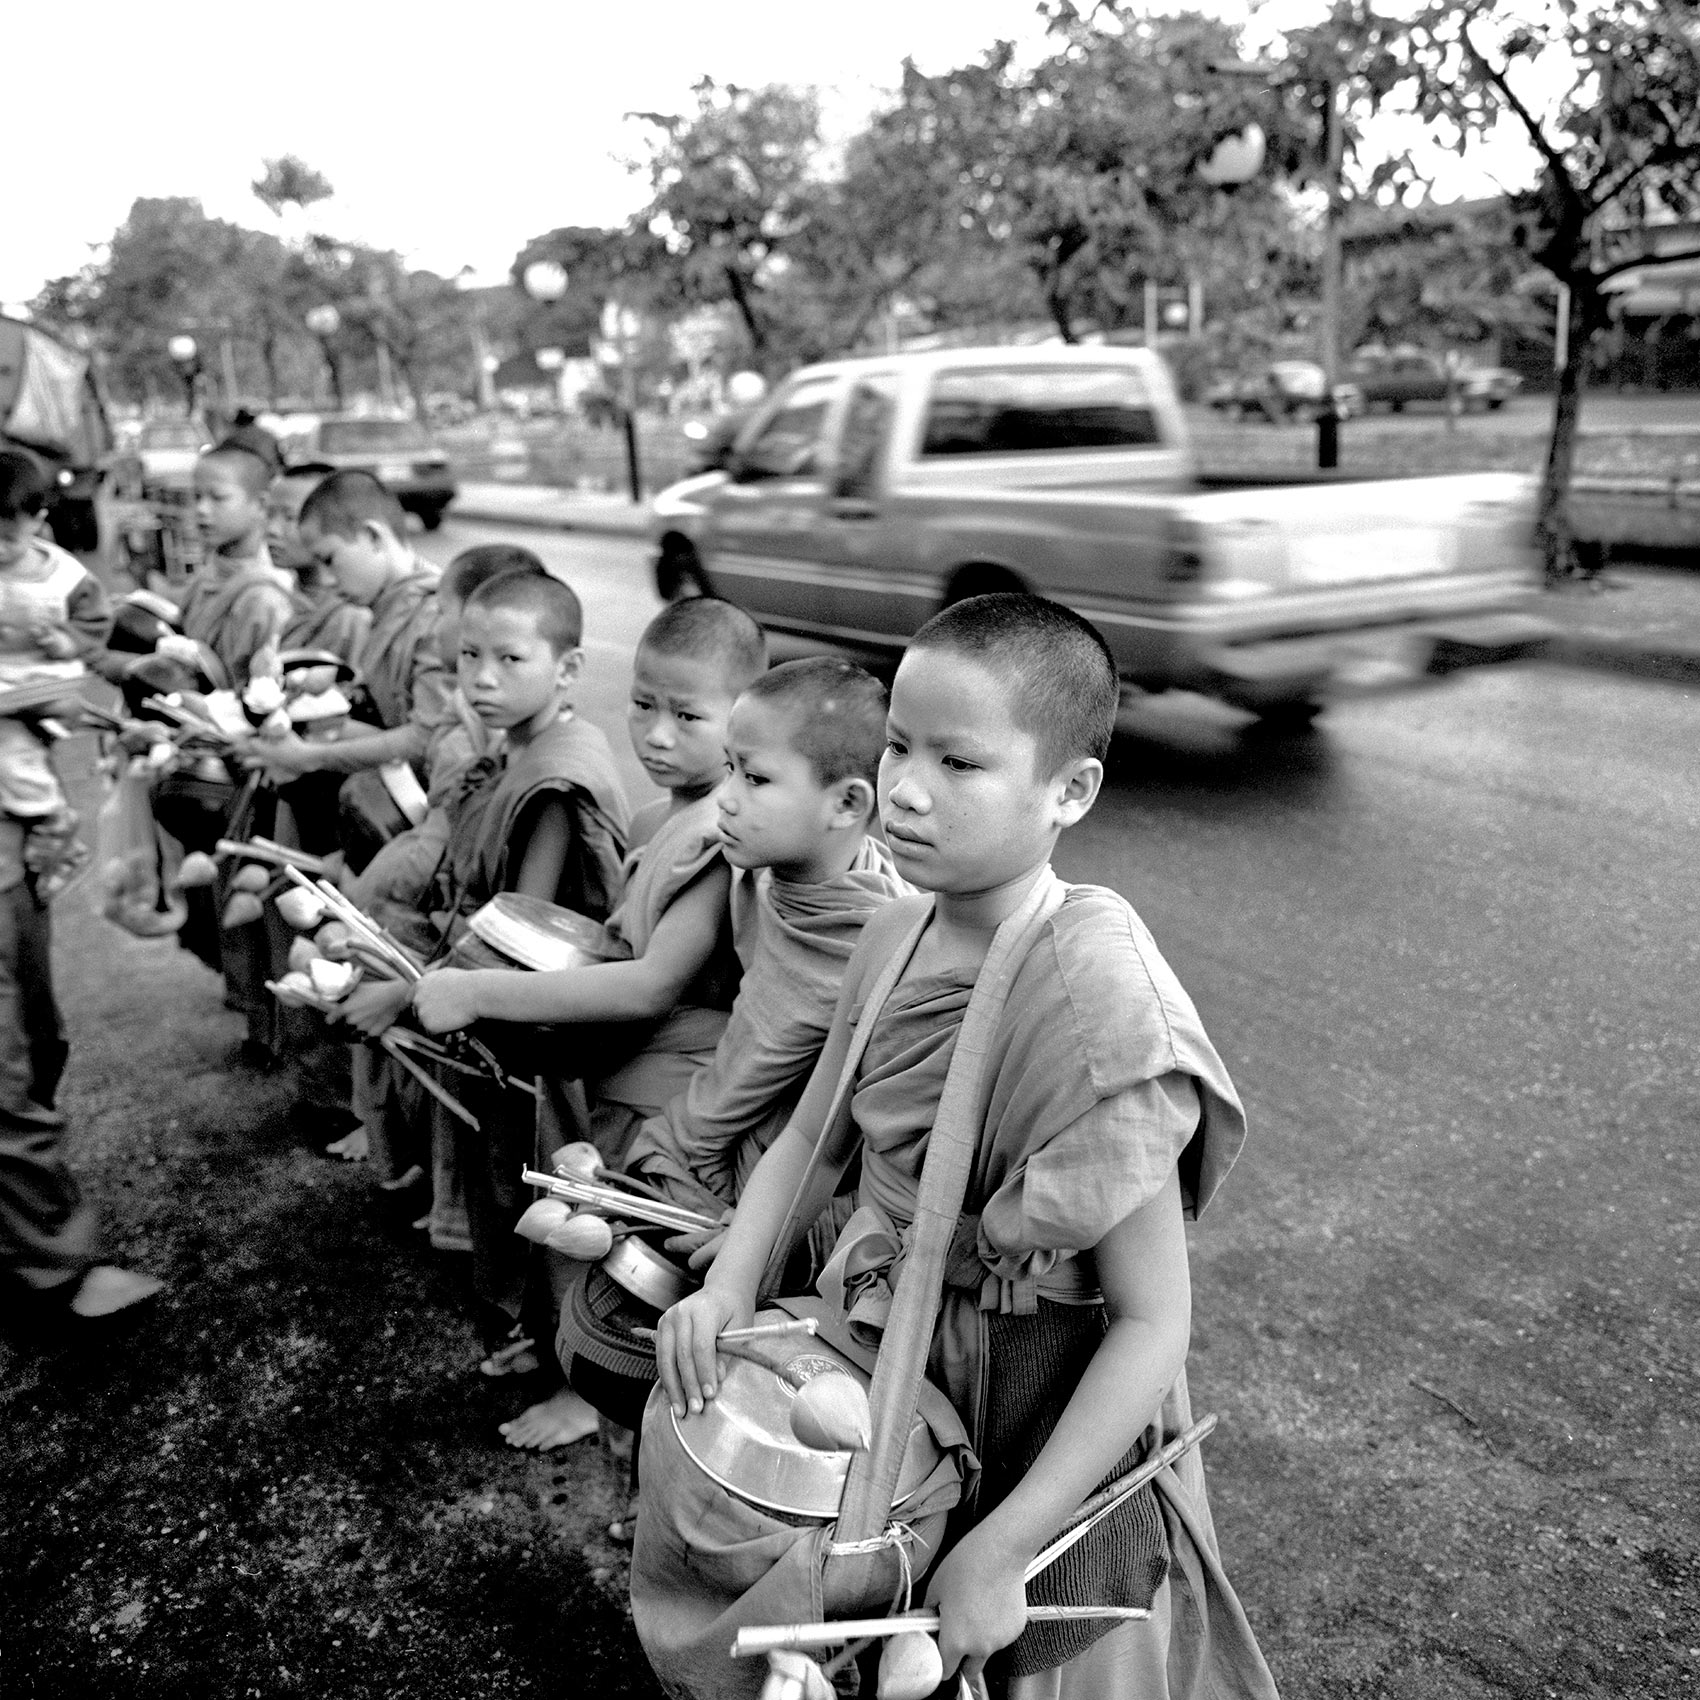 a-group-of-young-boy-monks-stand-in-a-group-on-a-thai-street